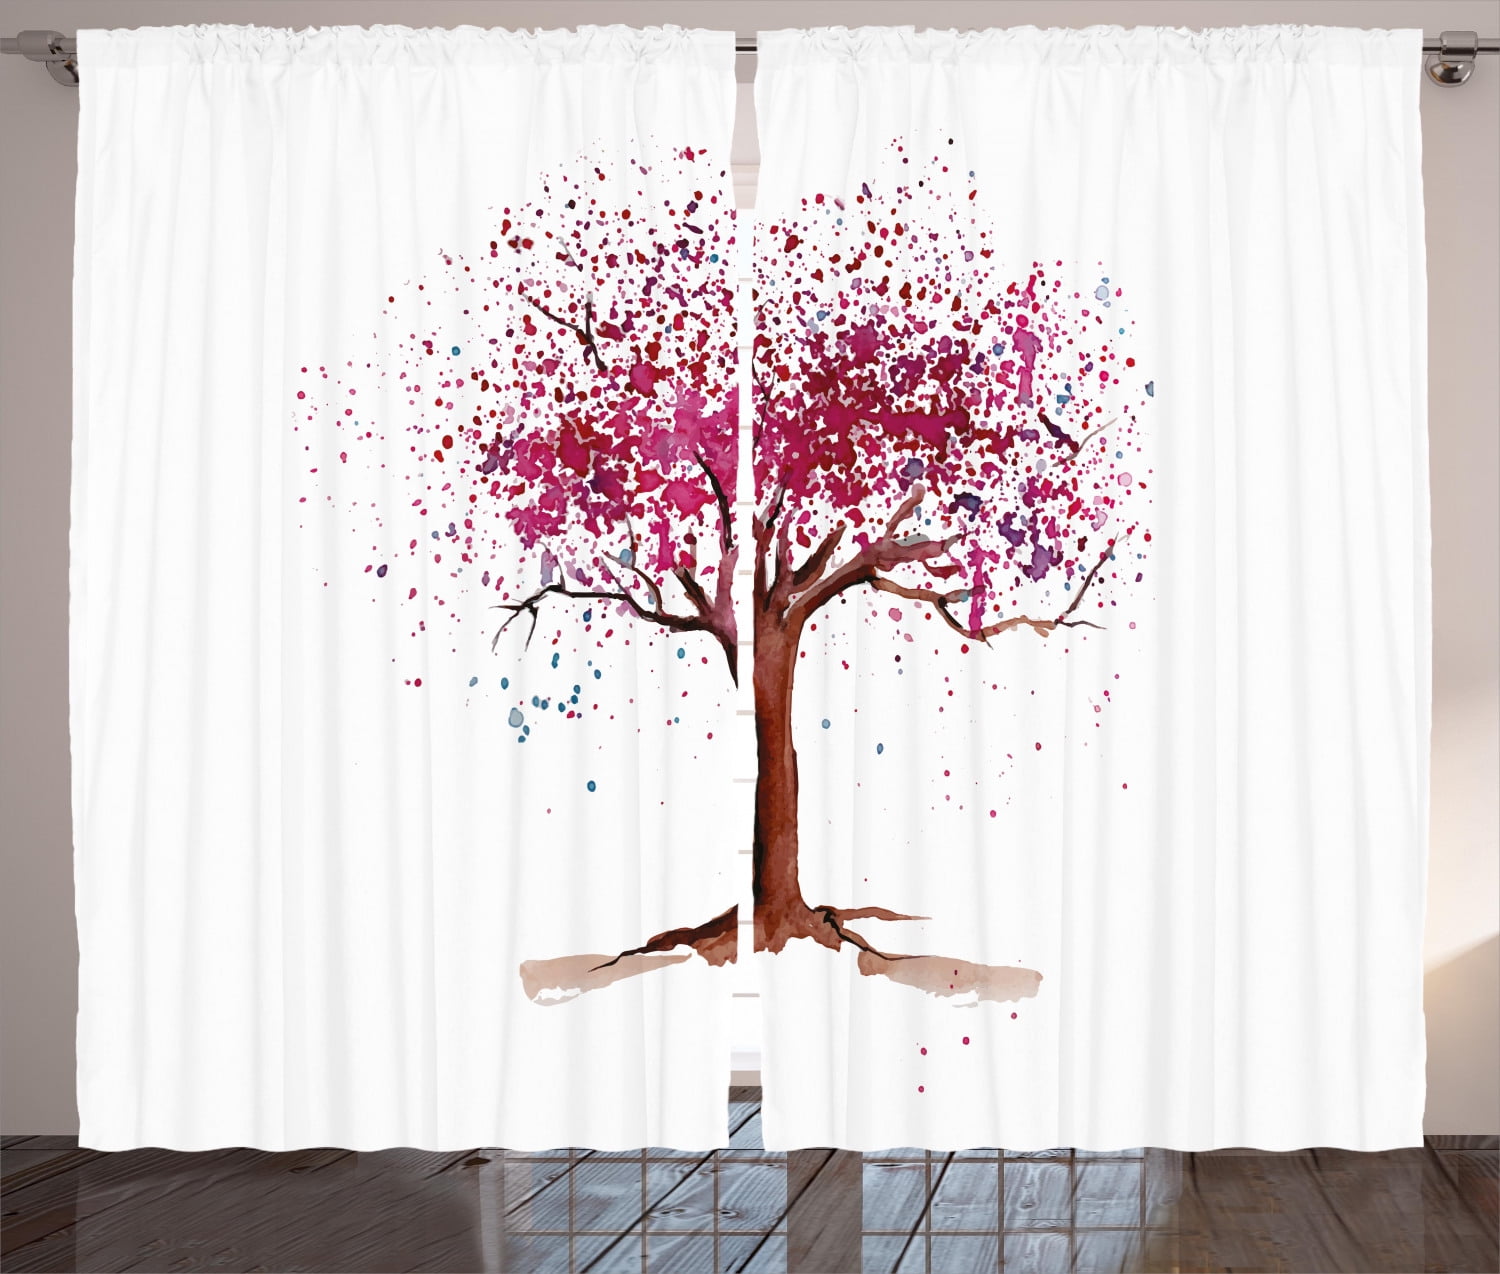 Japanese Cherry Blossoms Mural Printing Blockout Curtain Window Curtains Drapes 